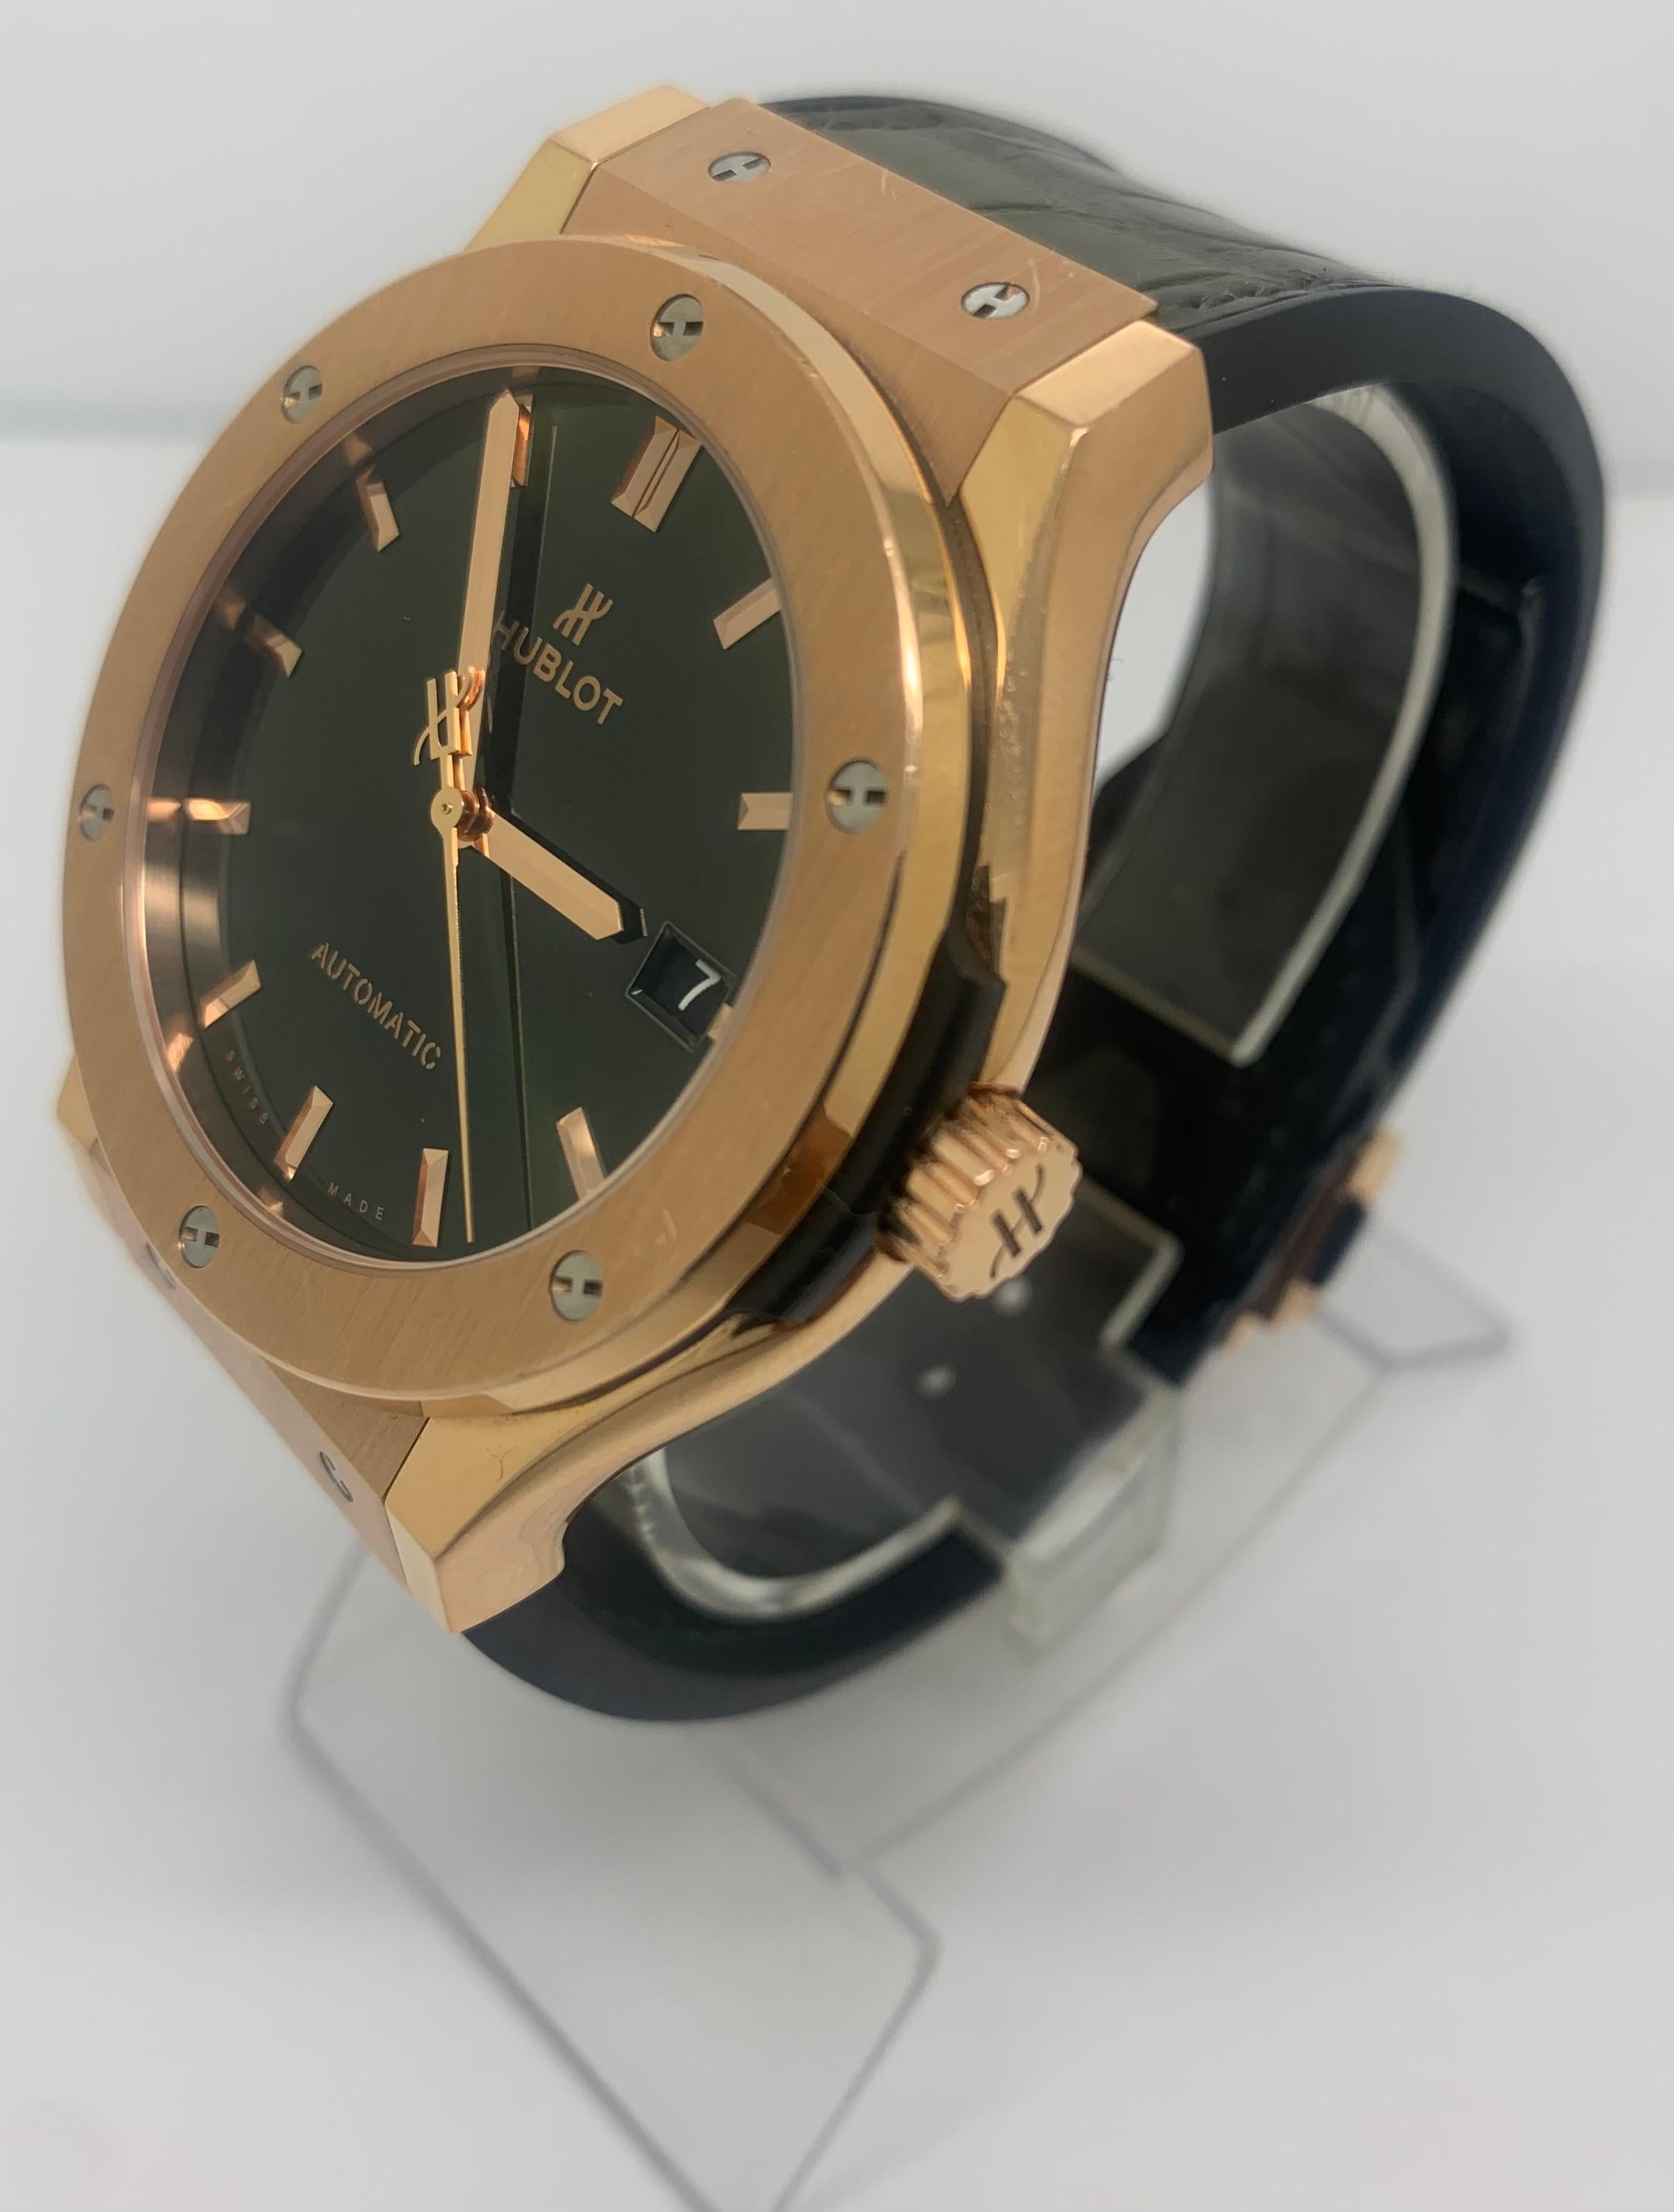 Hubolt Green Mens Classic Fusion 45mm Rose Gold Watch

all original!!!

very good condition

original box and papers

shop with confidence

2 year warranty!!

